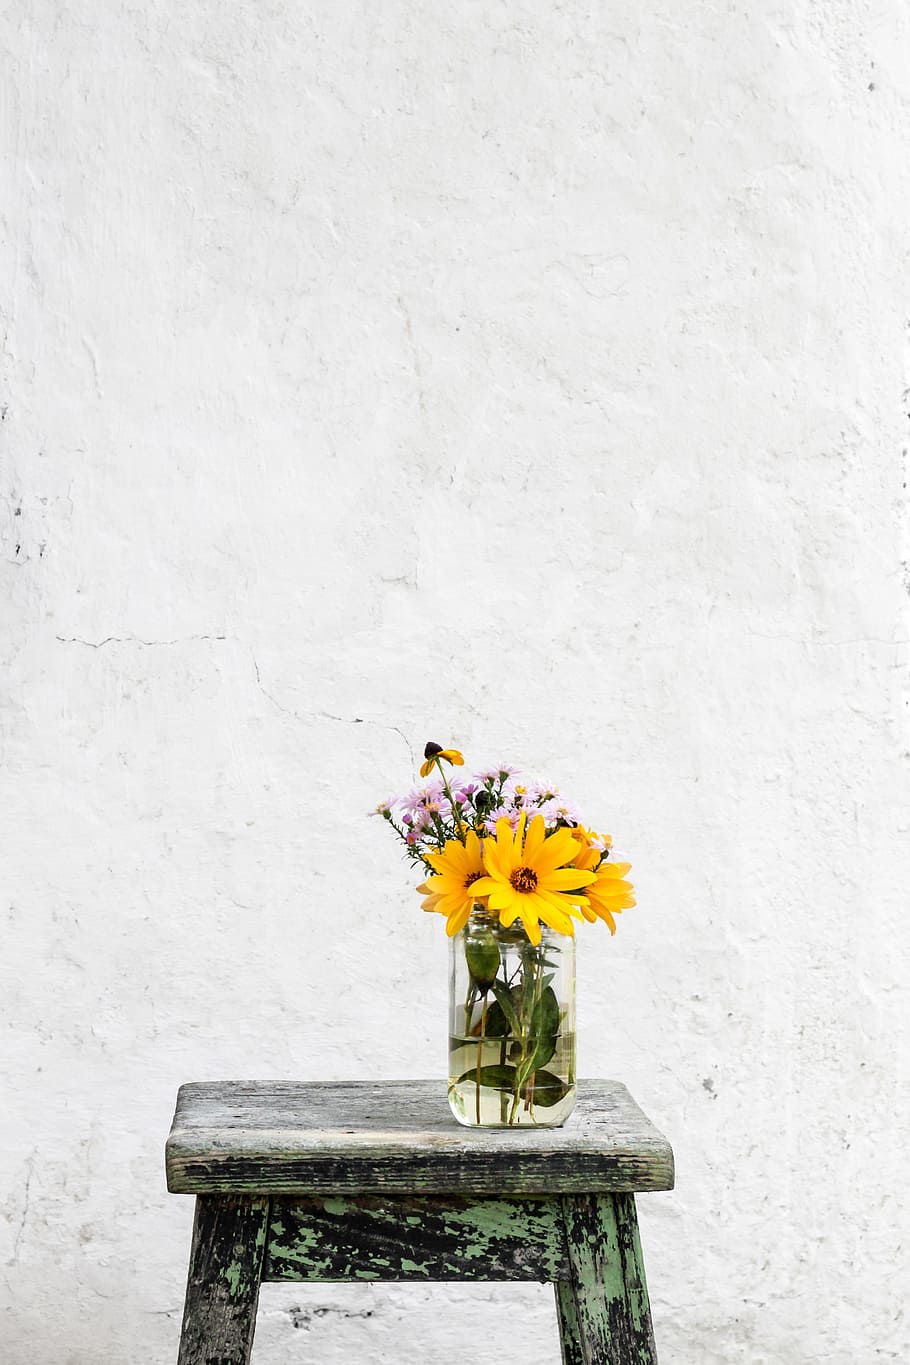 wooden, table, yellow, flower, vase, glass, jar, water, flowering plant, plant